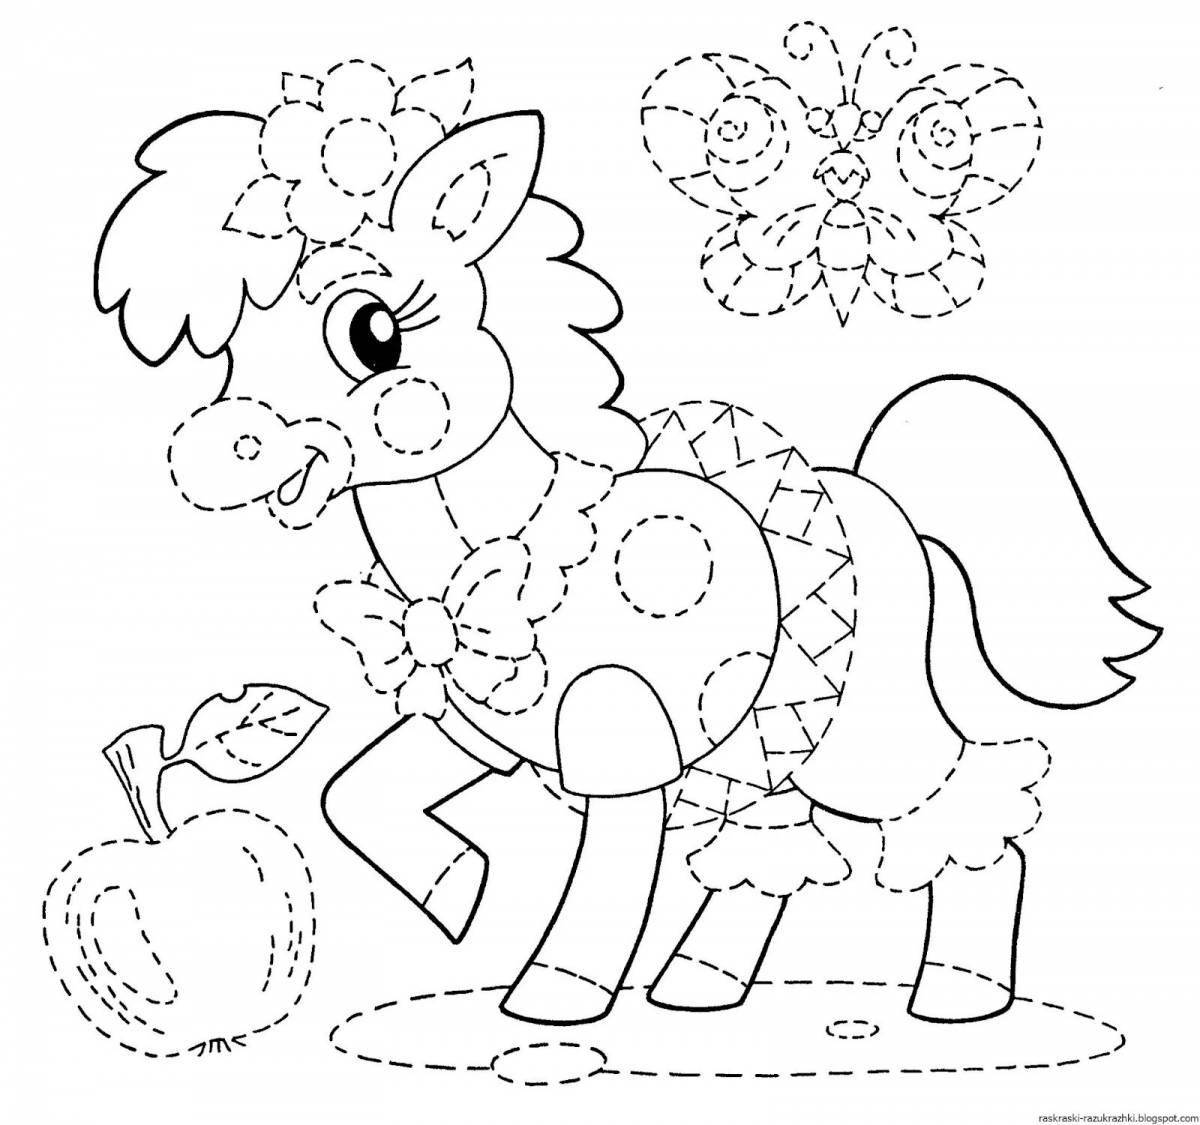 Adorable coloring book for kids 5-6 years old